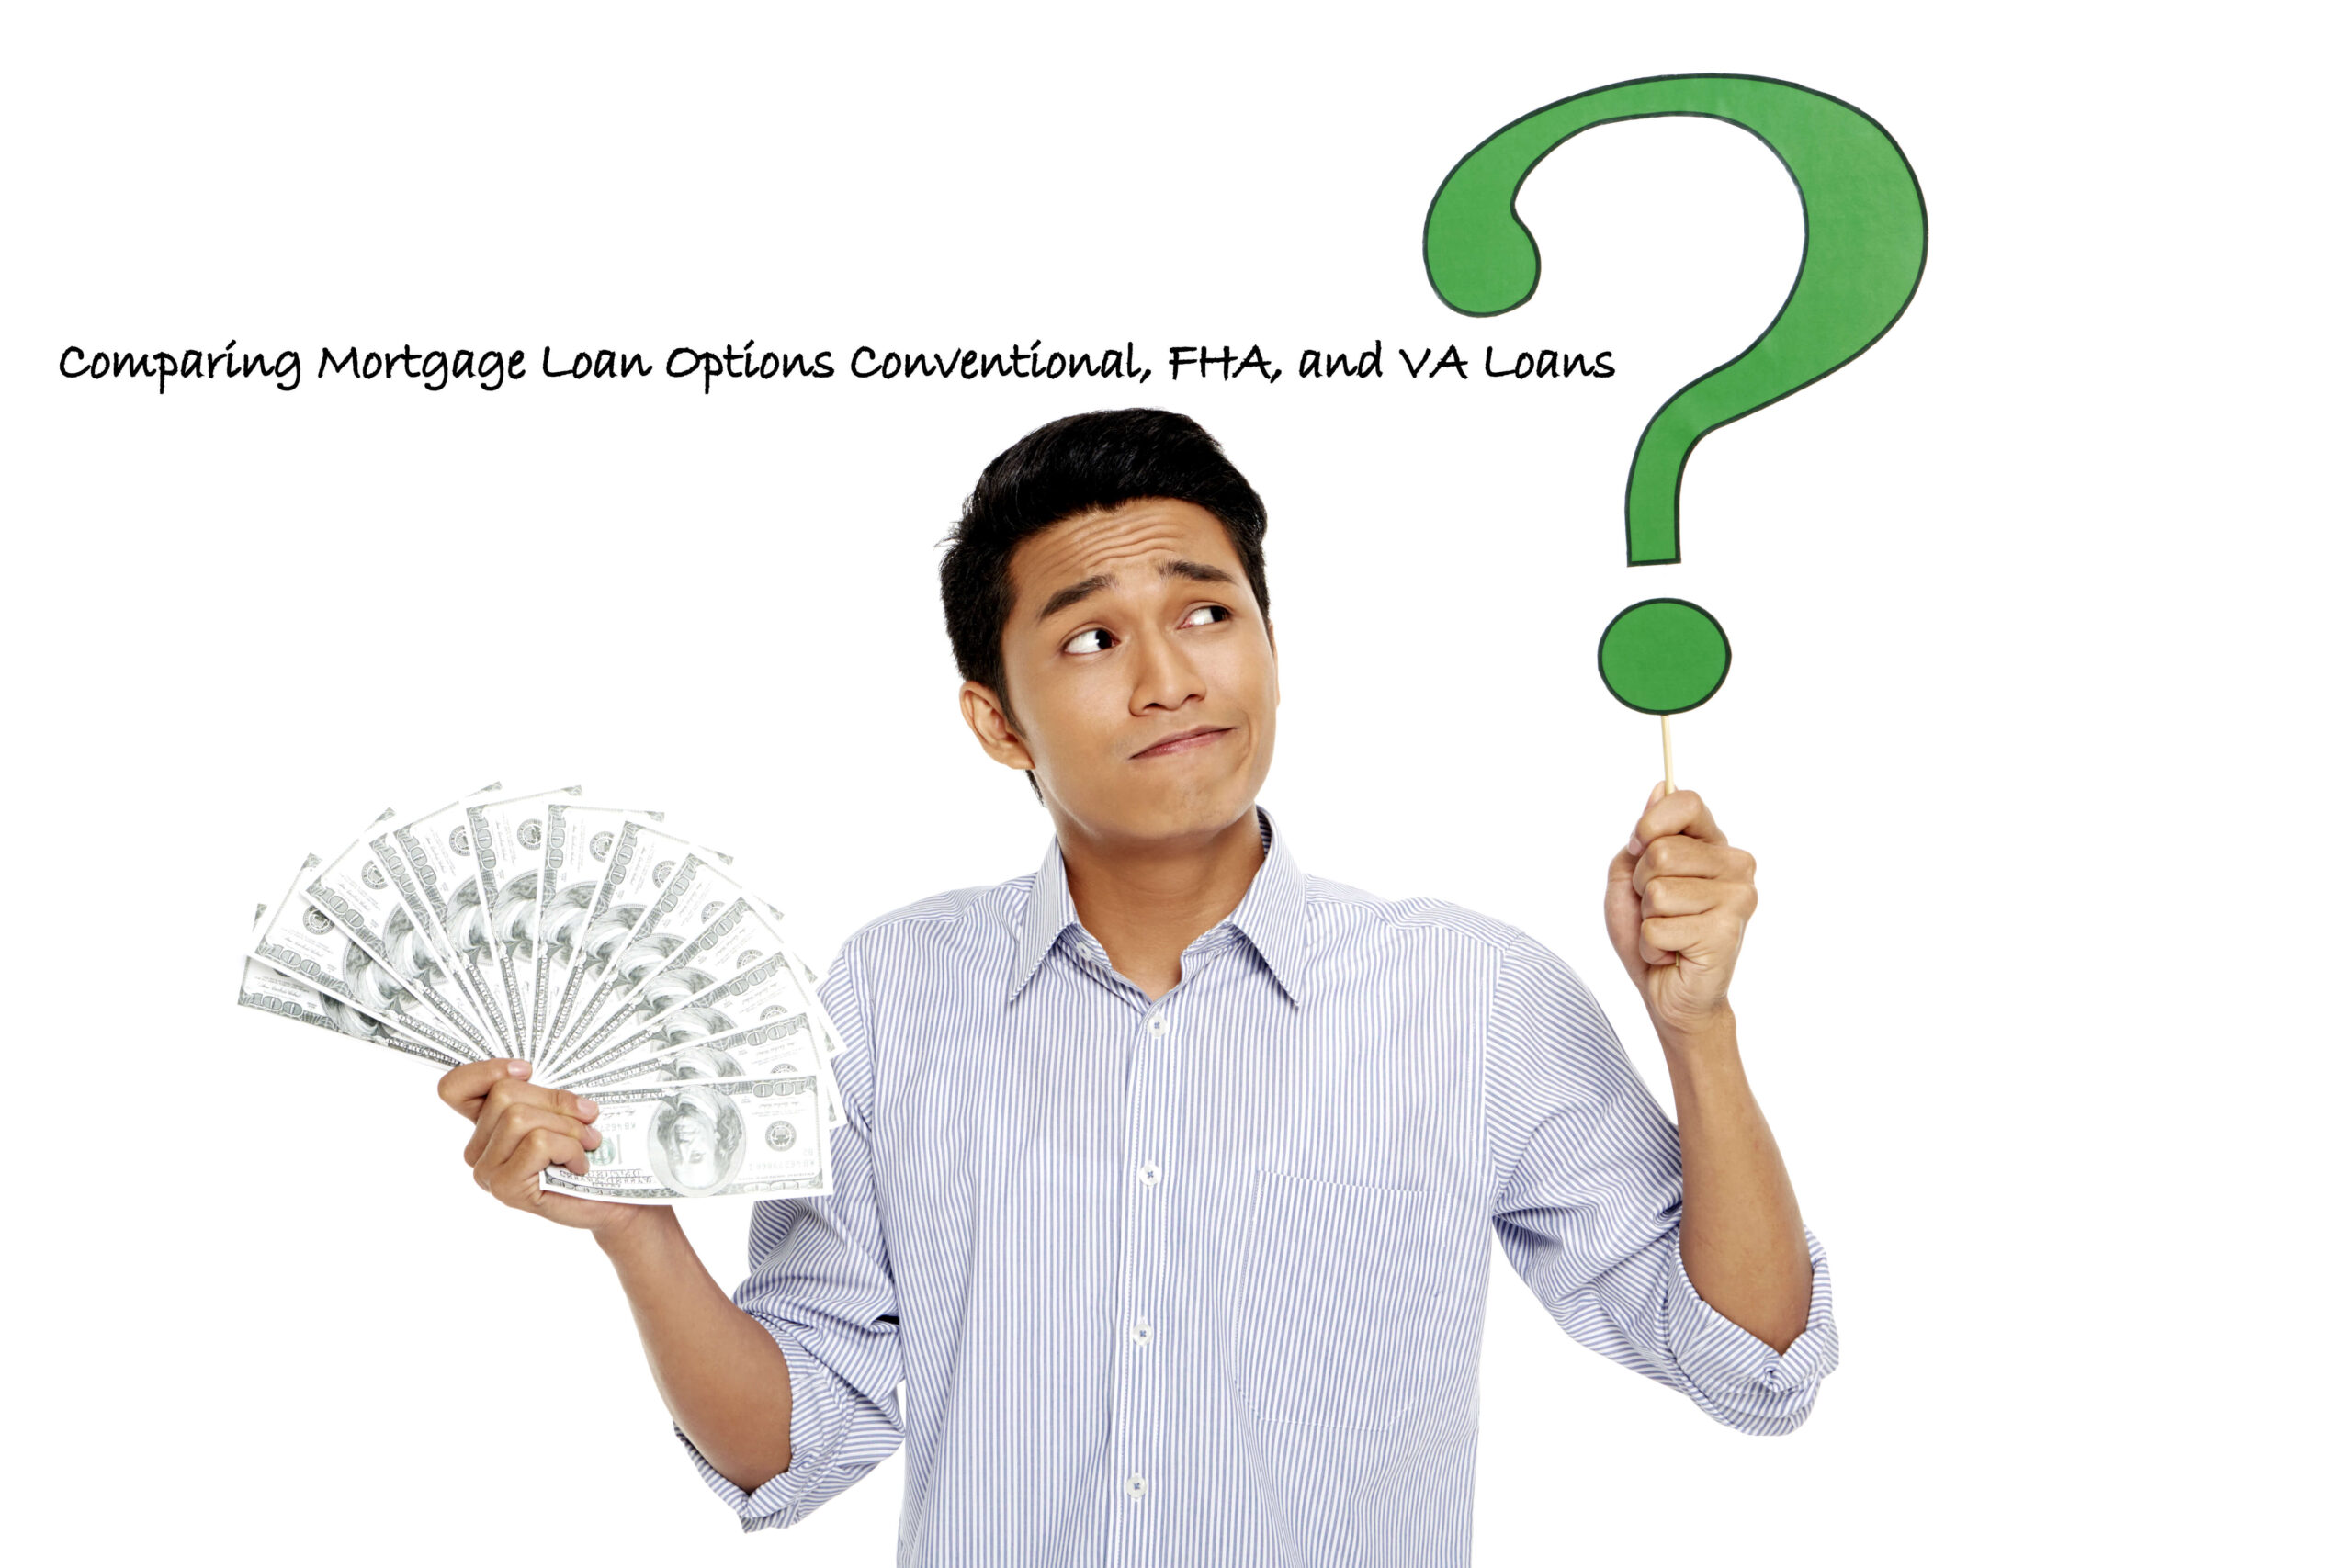 Comparing Mortgage Loan Options: Conventional, FHA, and VA Loans